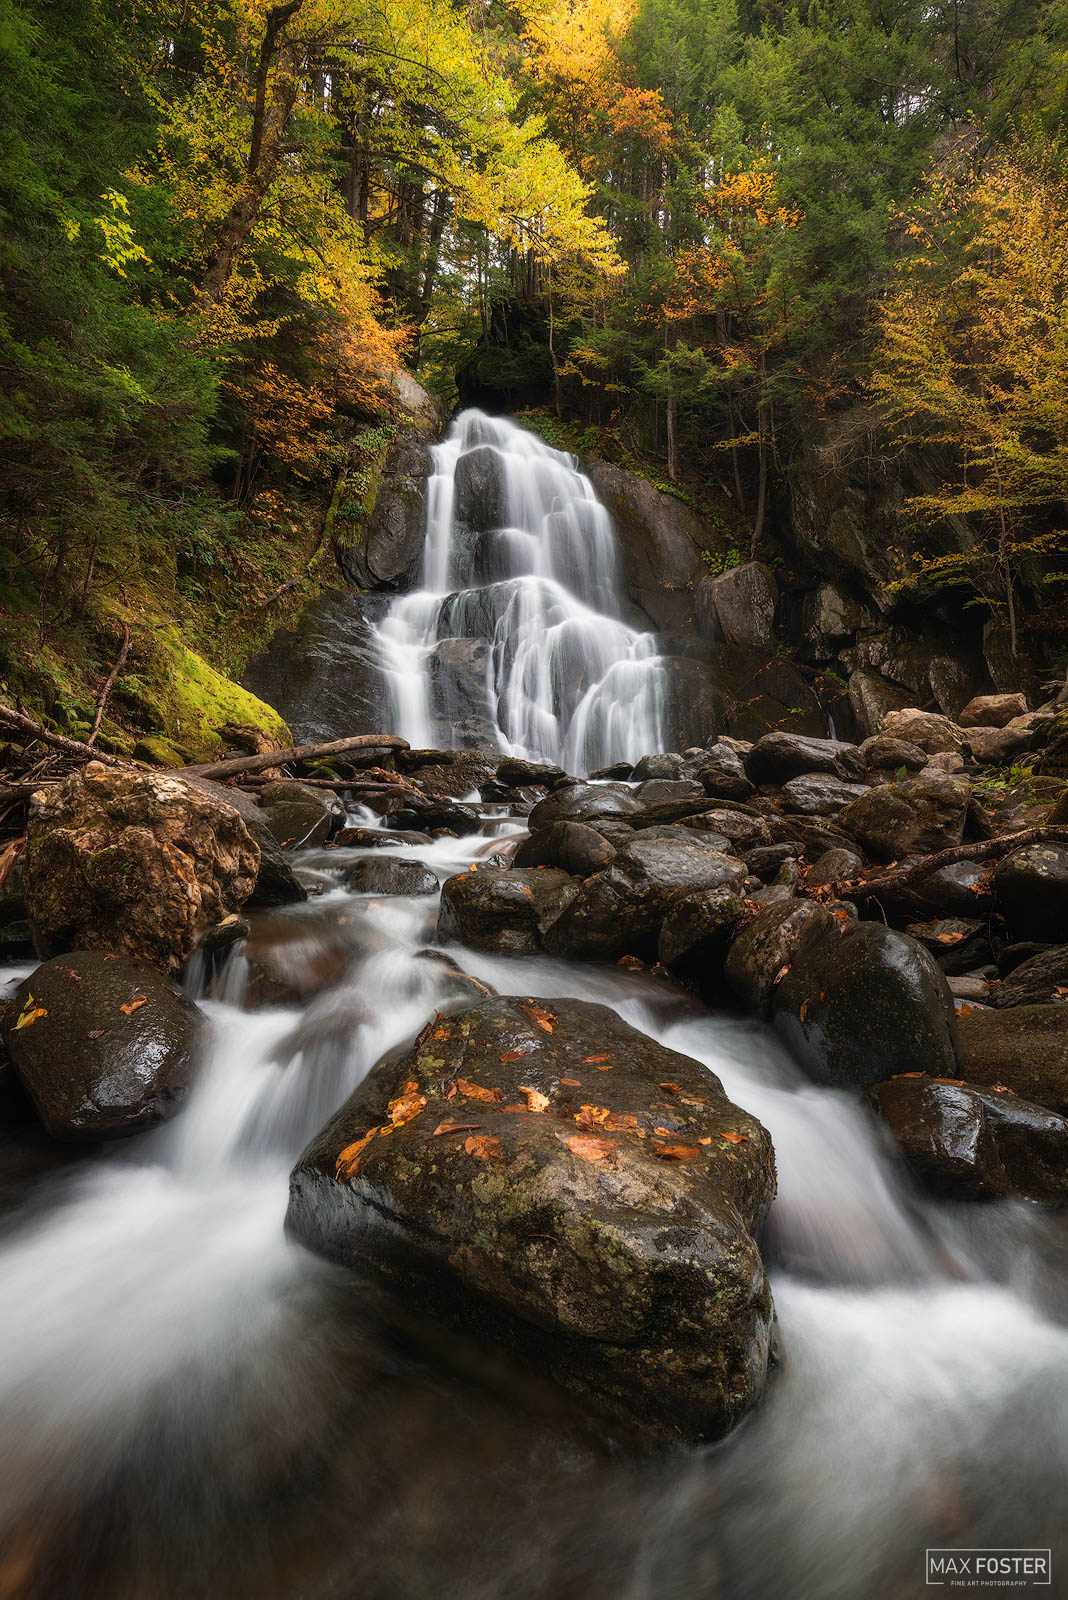 Breathe new life into your home with Reverence, Max Foster's limited edition photographic print of a Moss Glen Falls in Vermont...